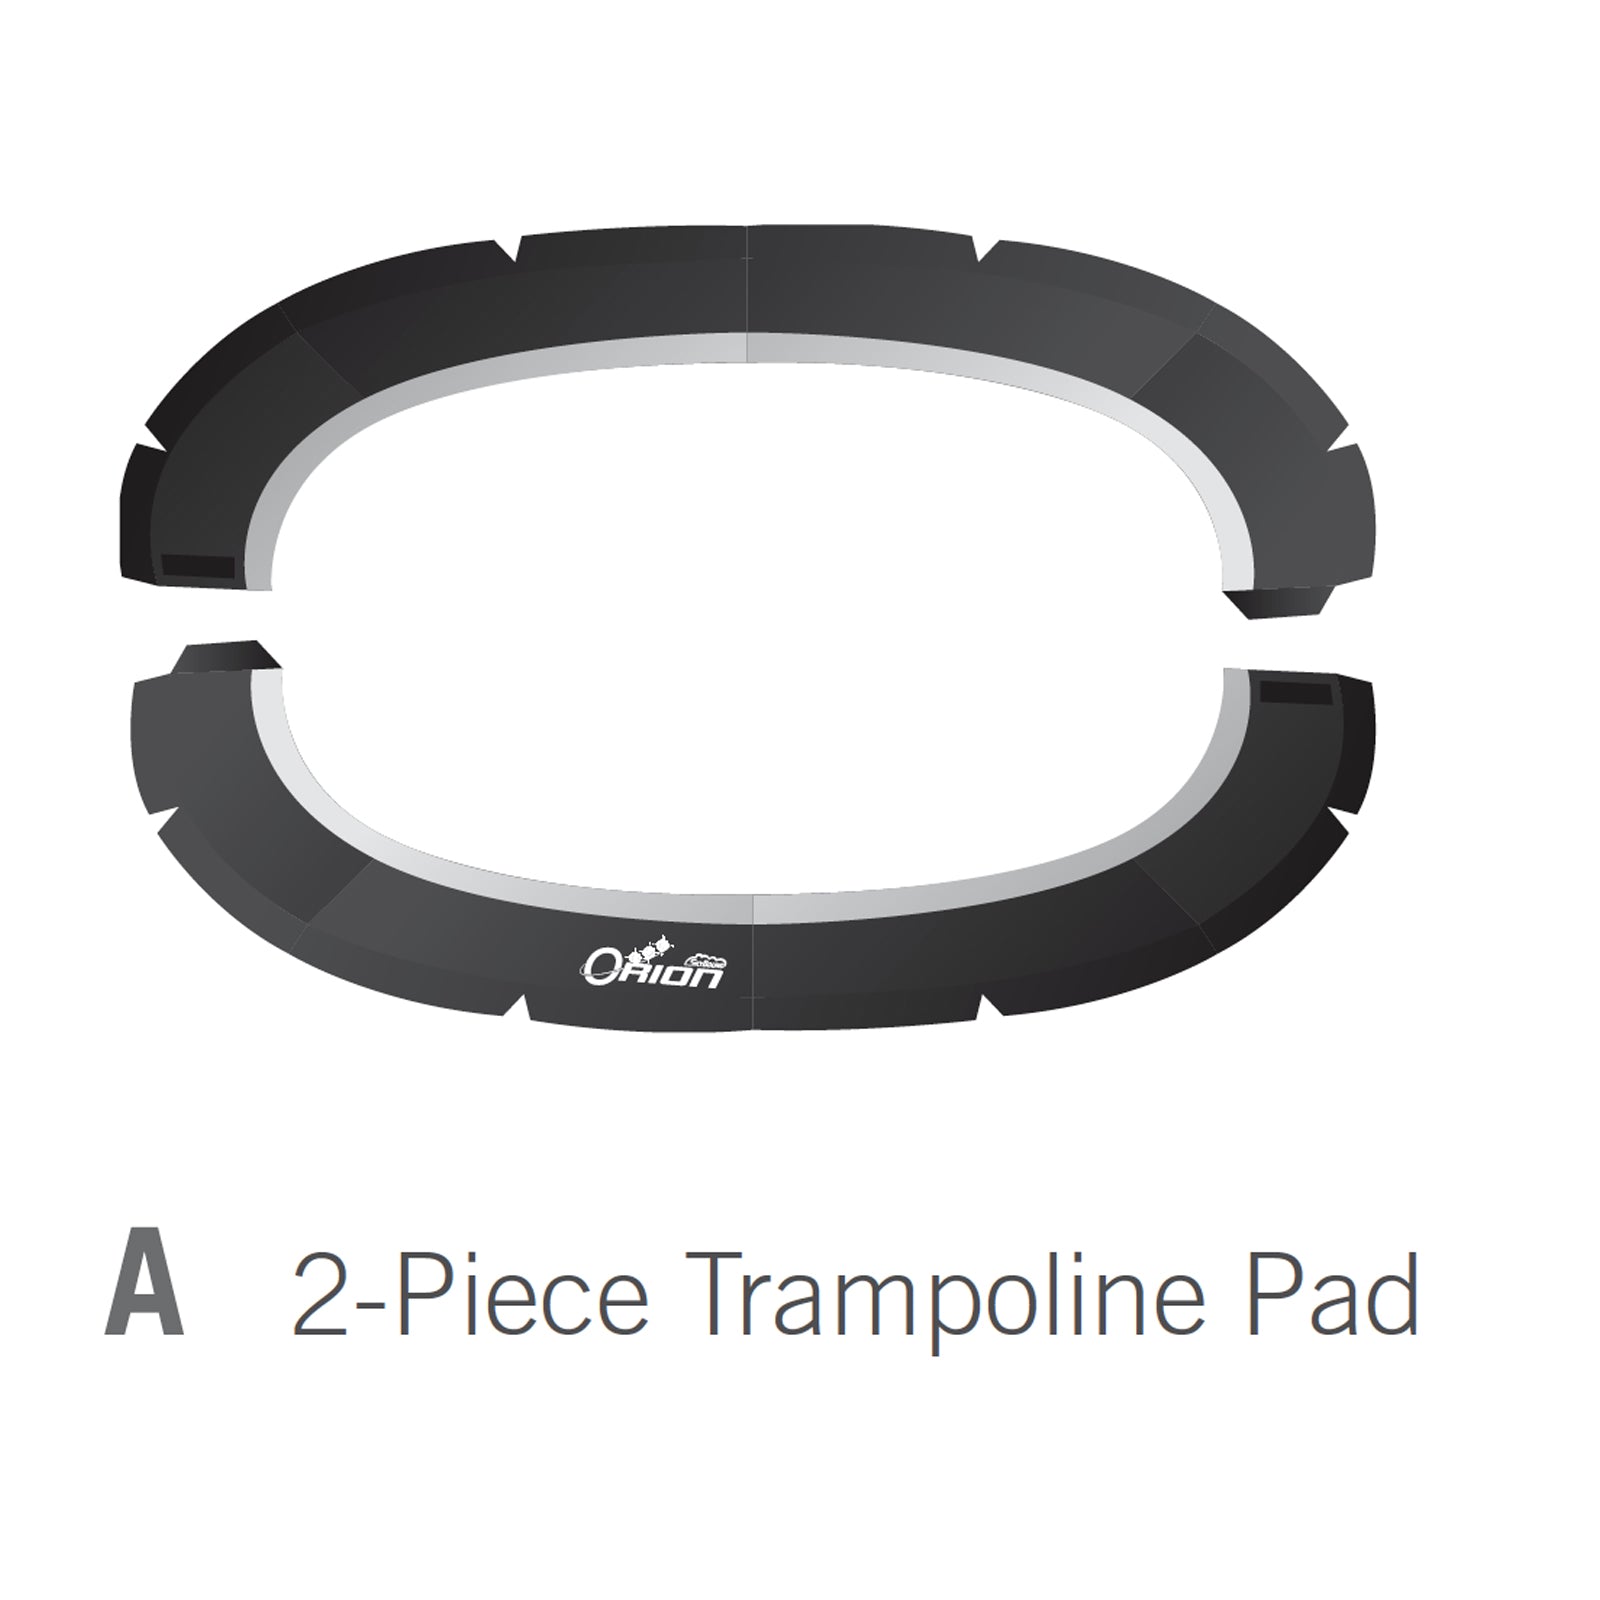 2-Piece Trampoline Pad for 10 x 14 Part A.